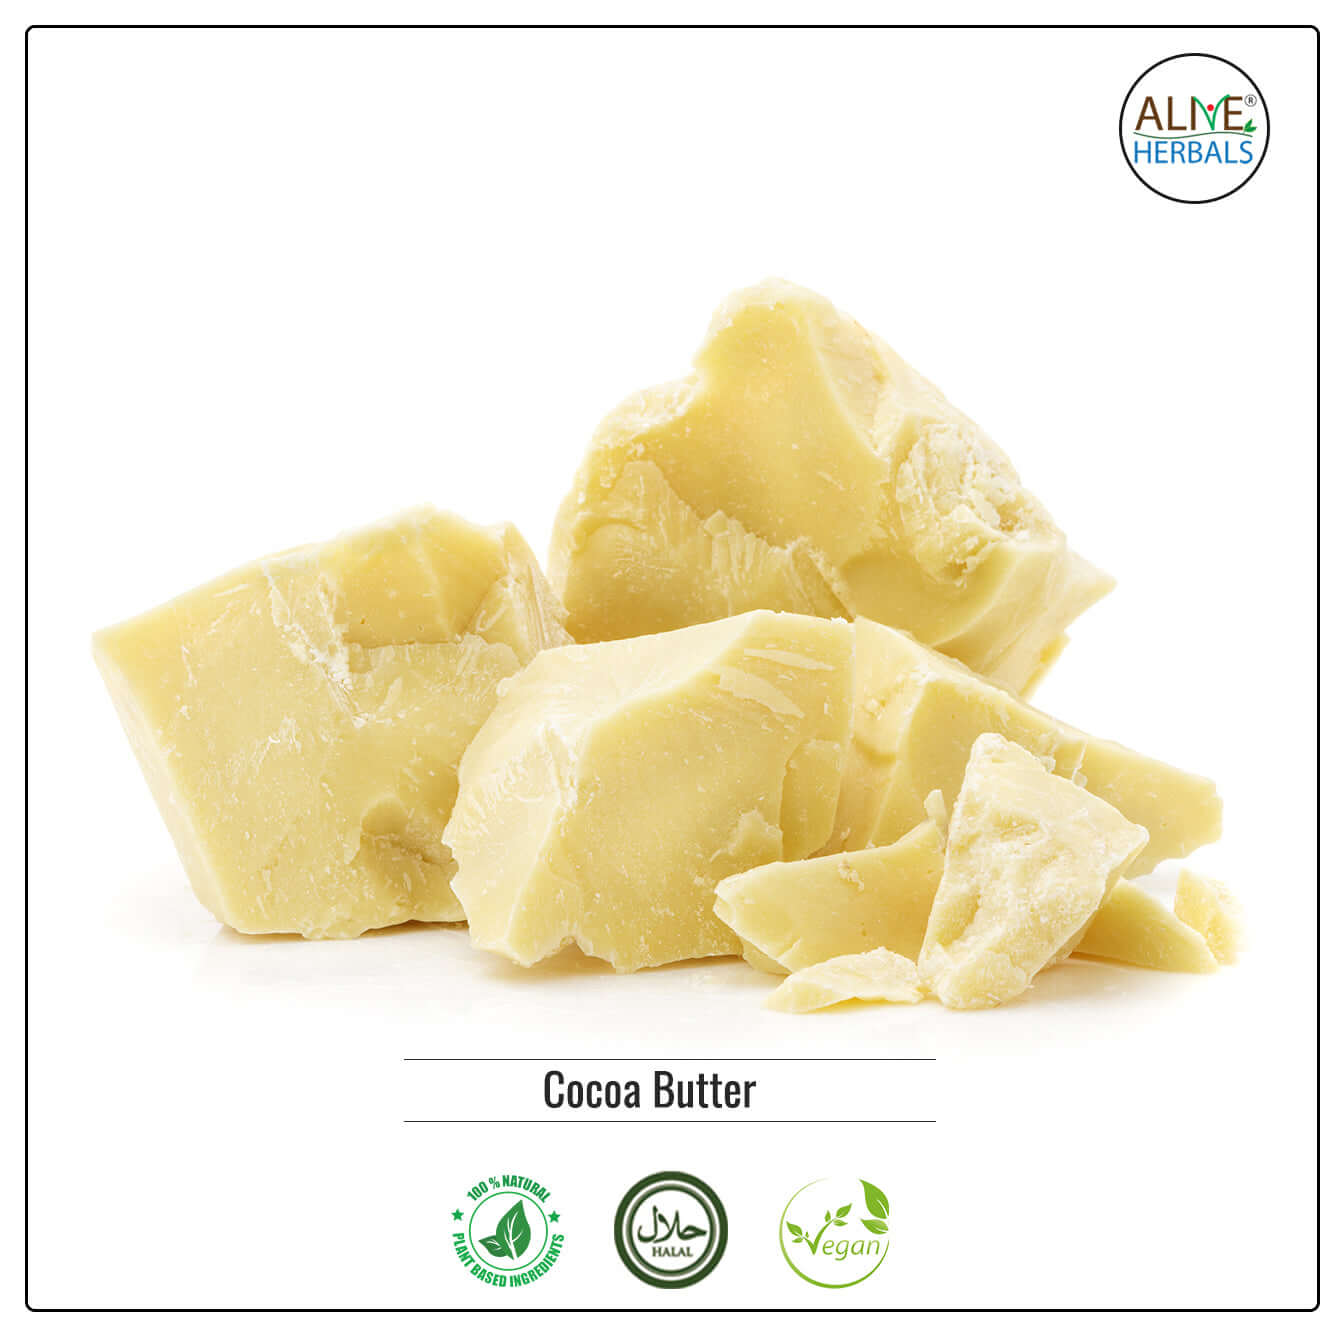 Cocoa Butter - Shop at Natural Food Store | Alive Herbals.